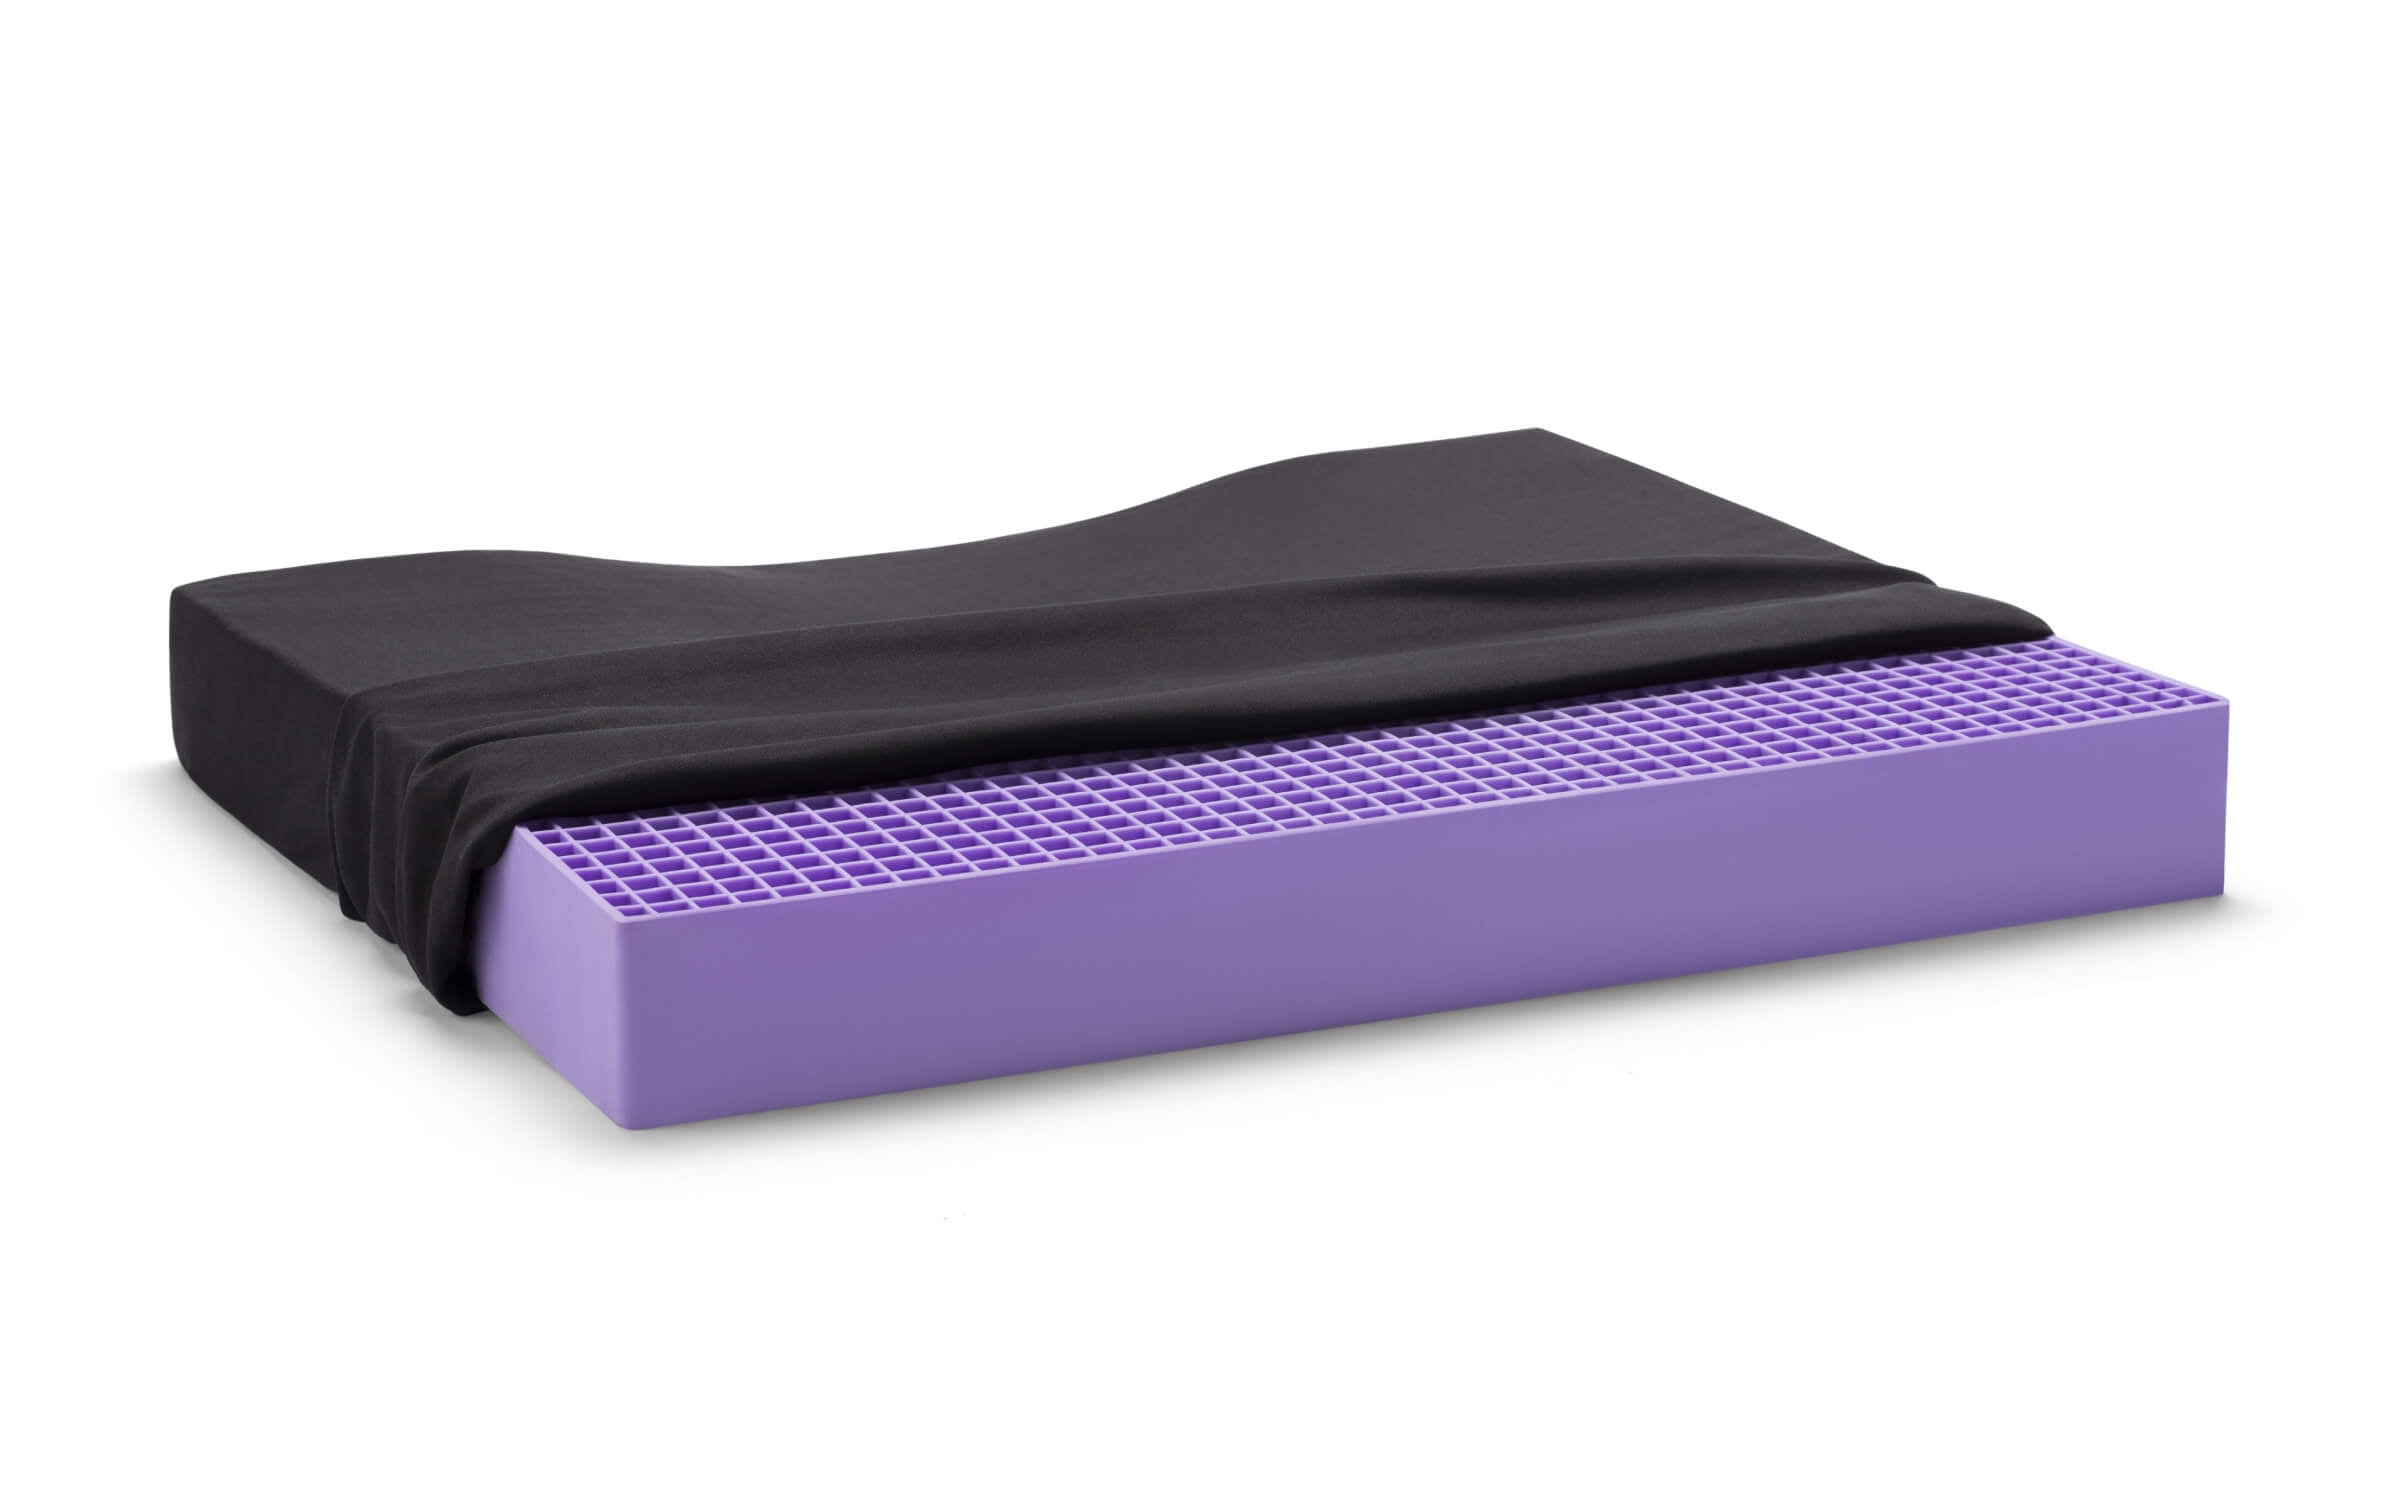 The Purple Double Seat Cushion — I tried it and loved its support and  comfort